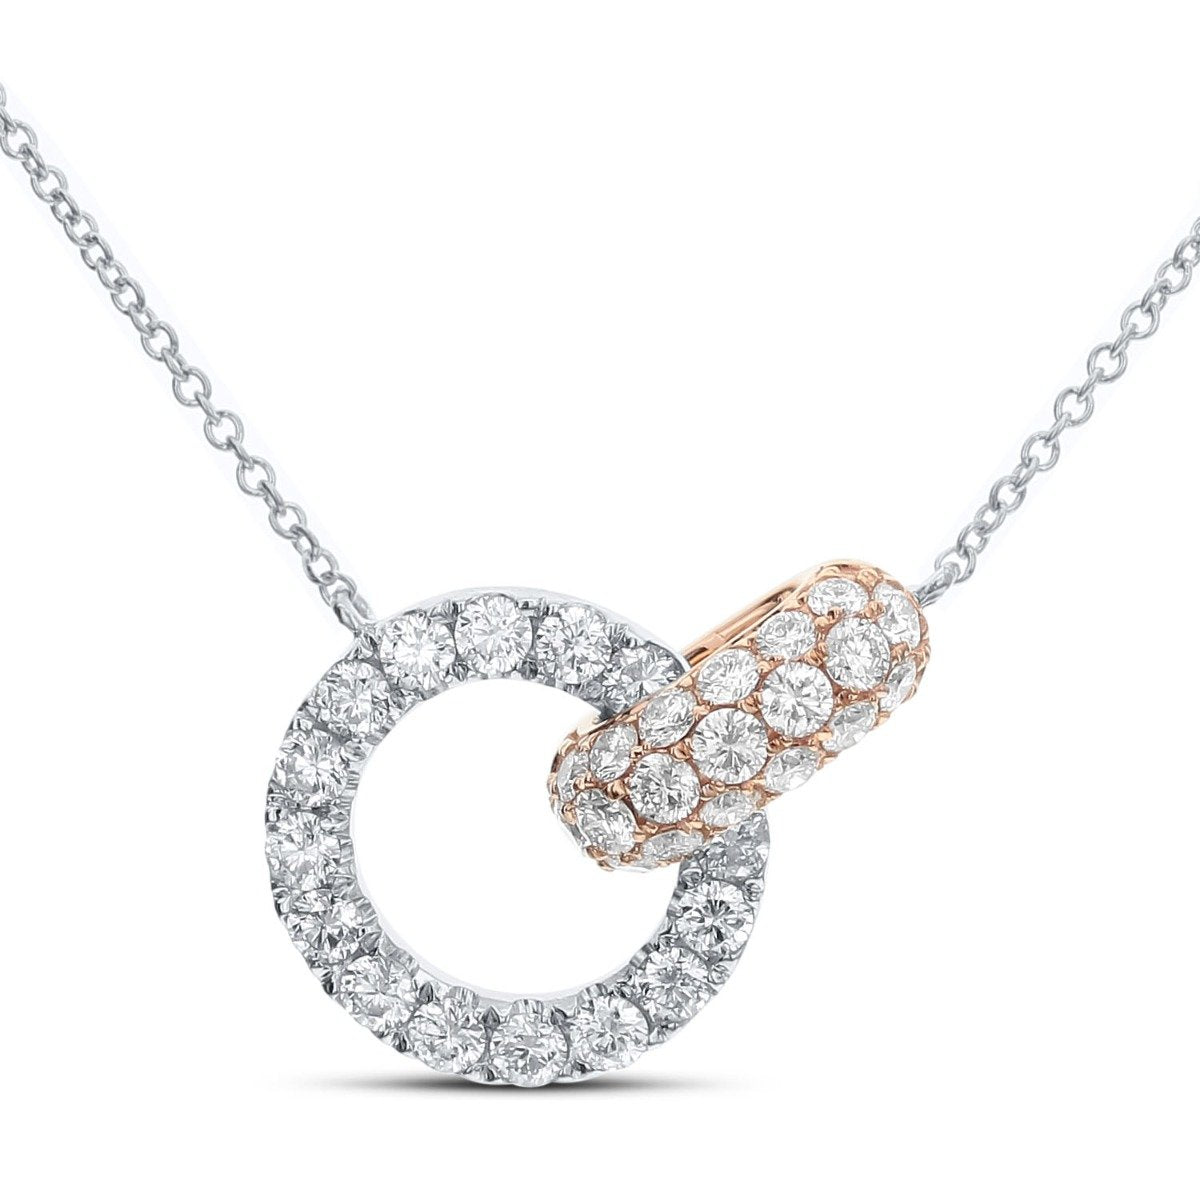 18KT Gold 1 CTW Interlocking Circle & Oval Diamond Necklace Rose and White